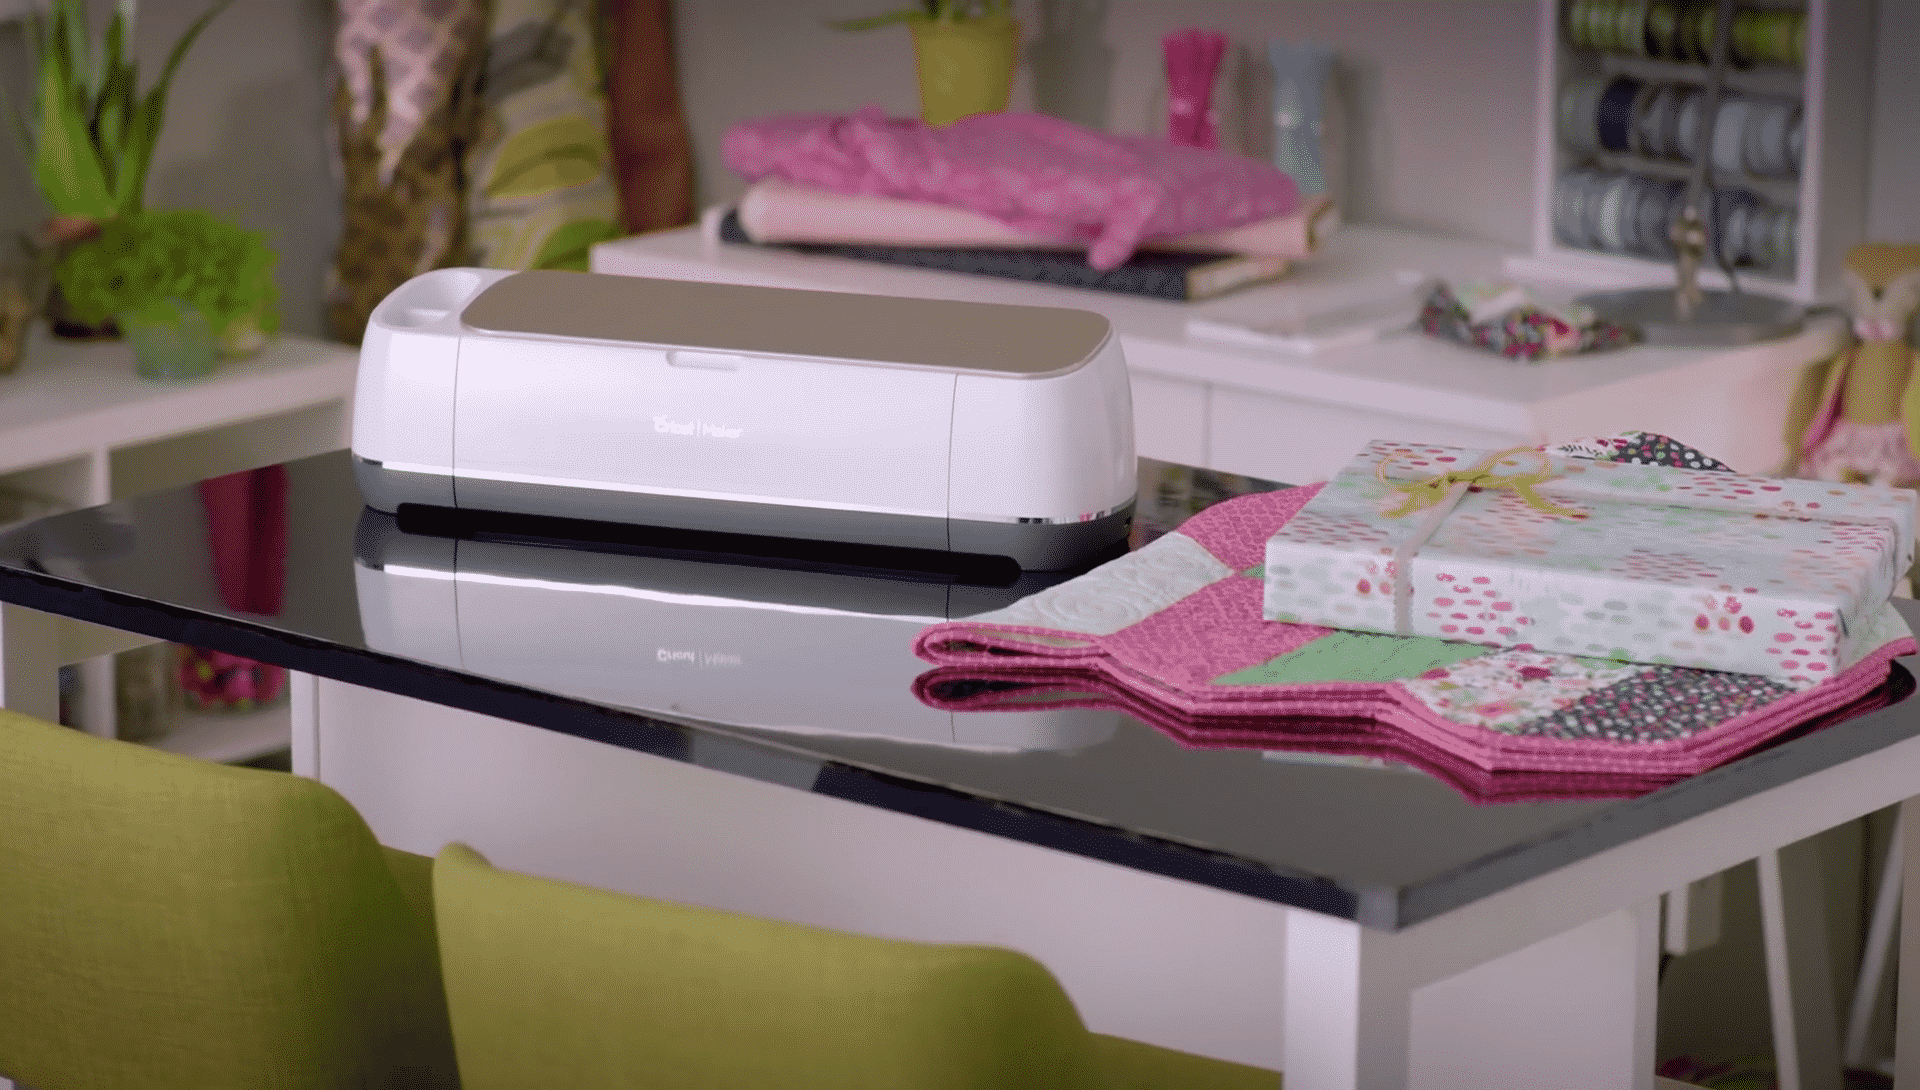 The Cricut Maker Machine & Fabric: Your Questions Answered